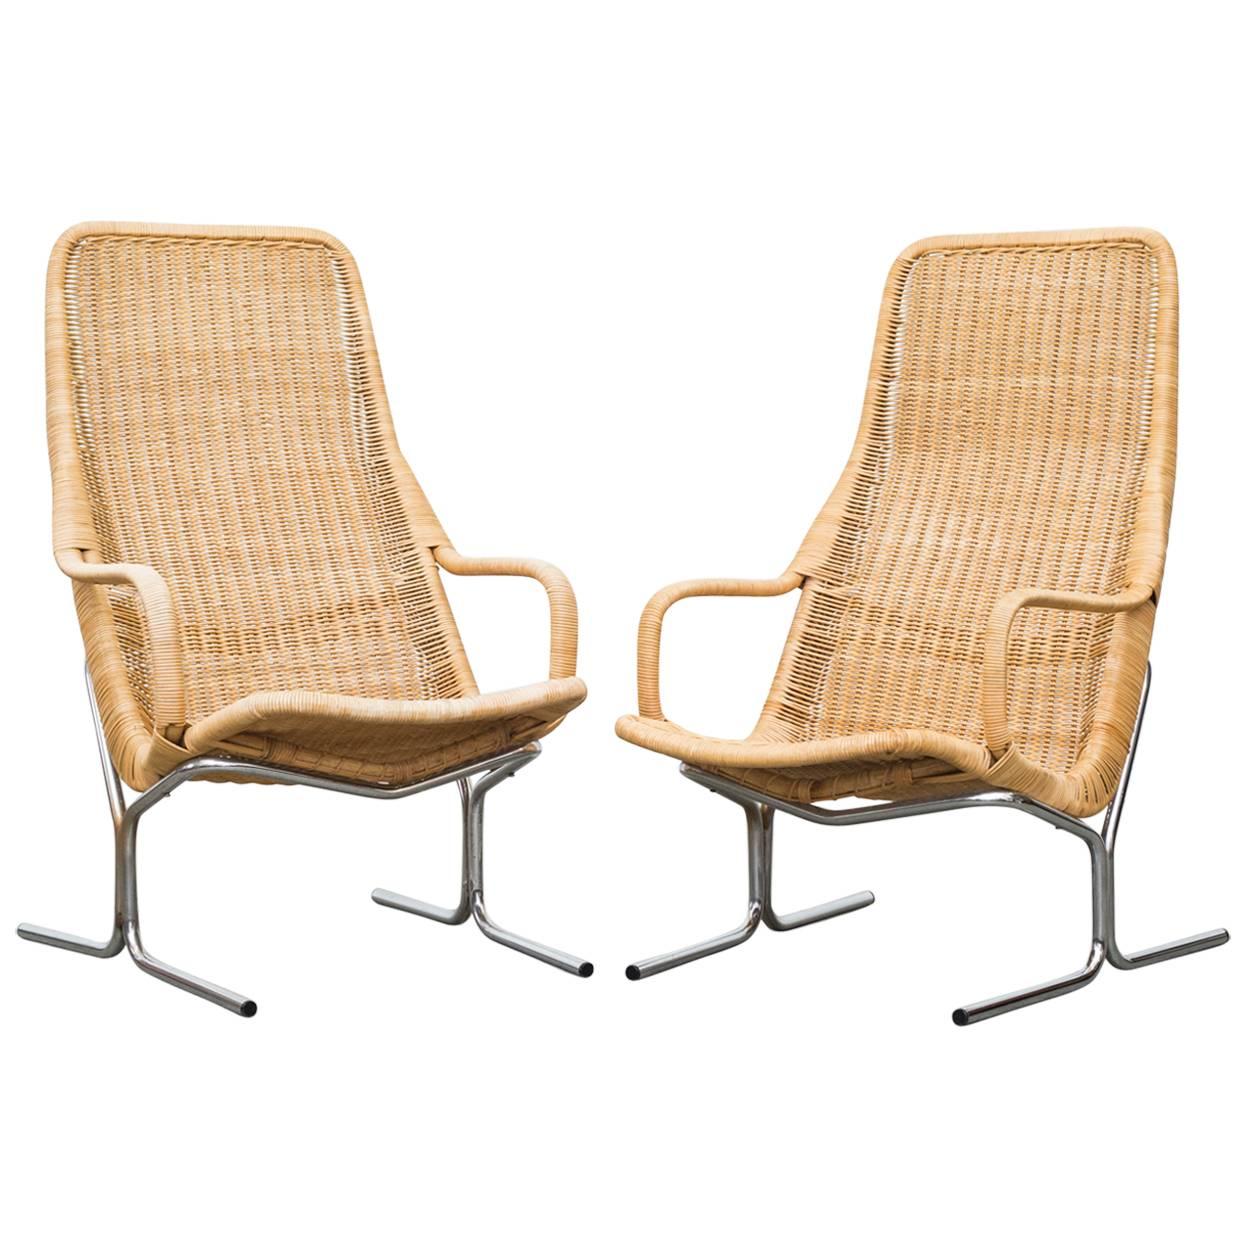 Pair of Dirk Van Sliedrecht Rattan Lounge Chairs with Chrome Sled Frame